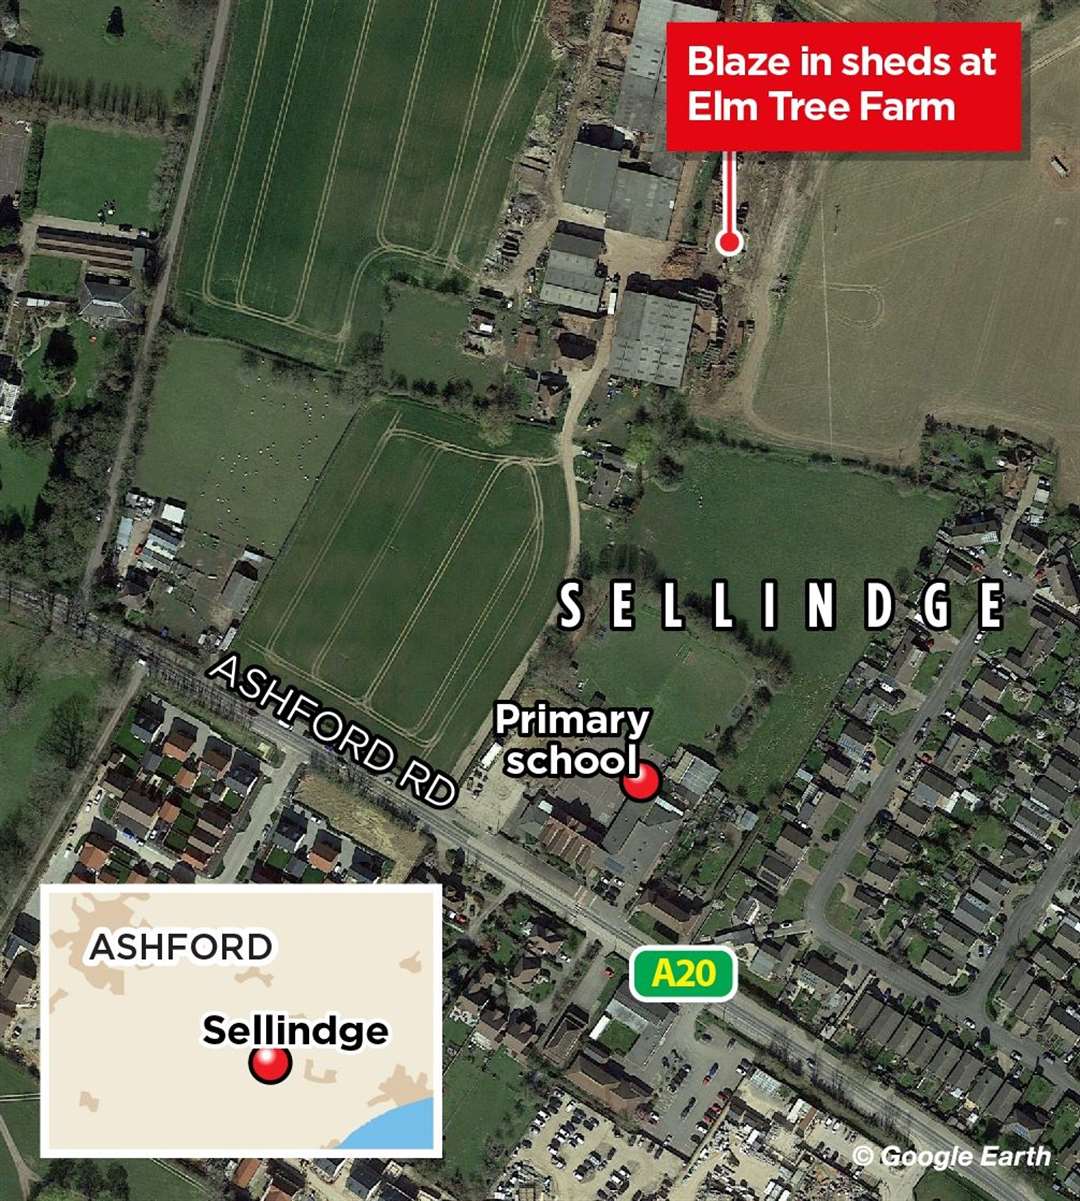 A map showing how close the blaze at the farm is to Sellindge Primary School